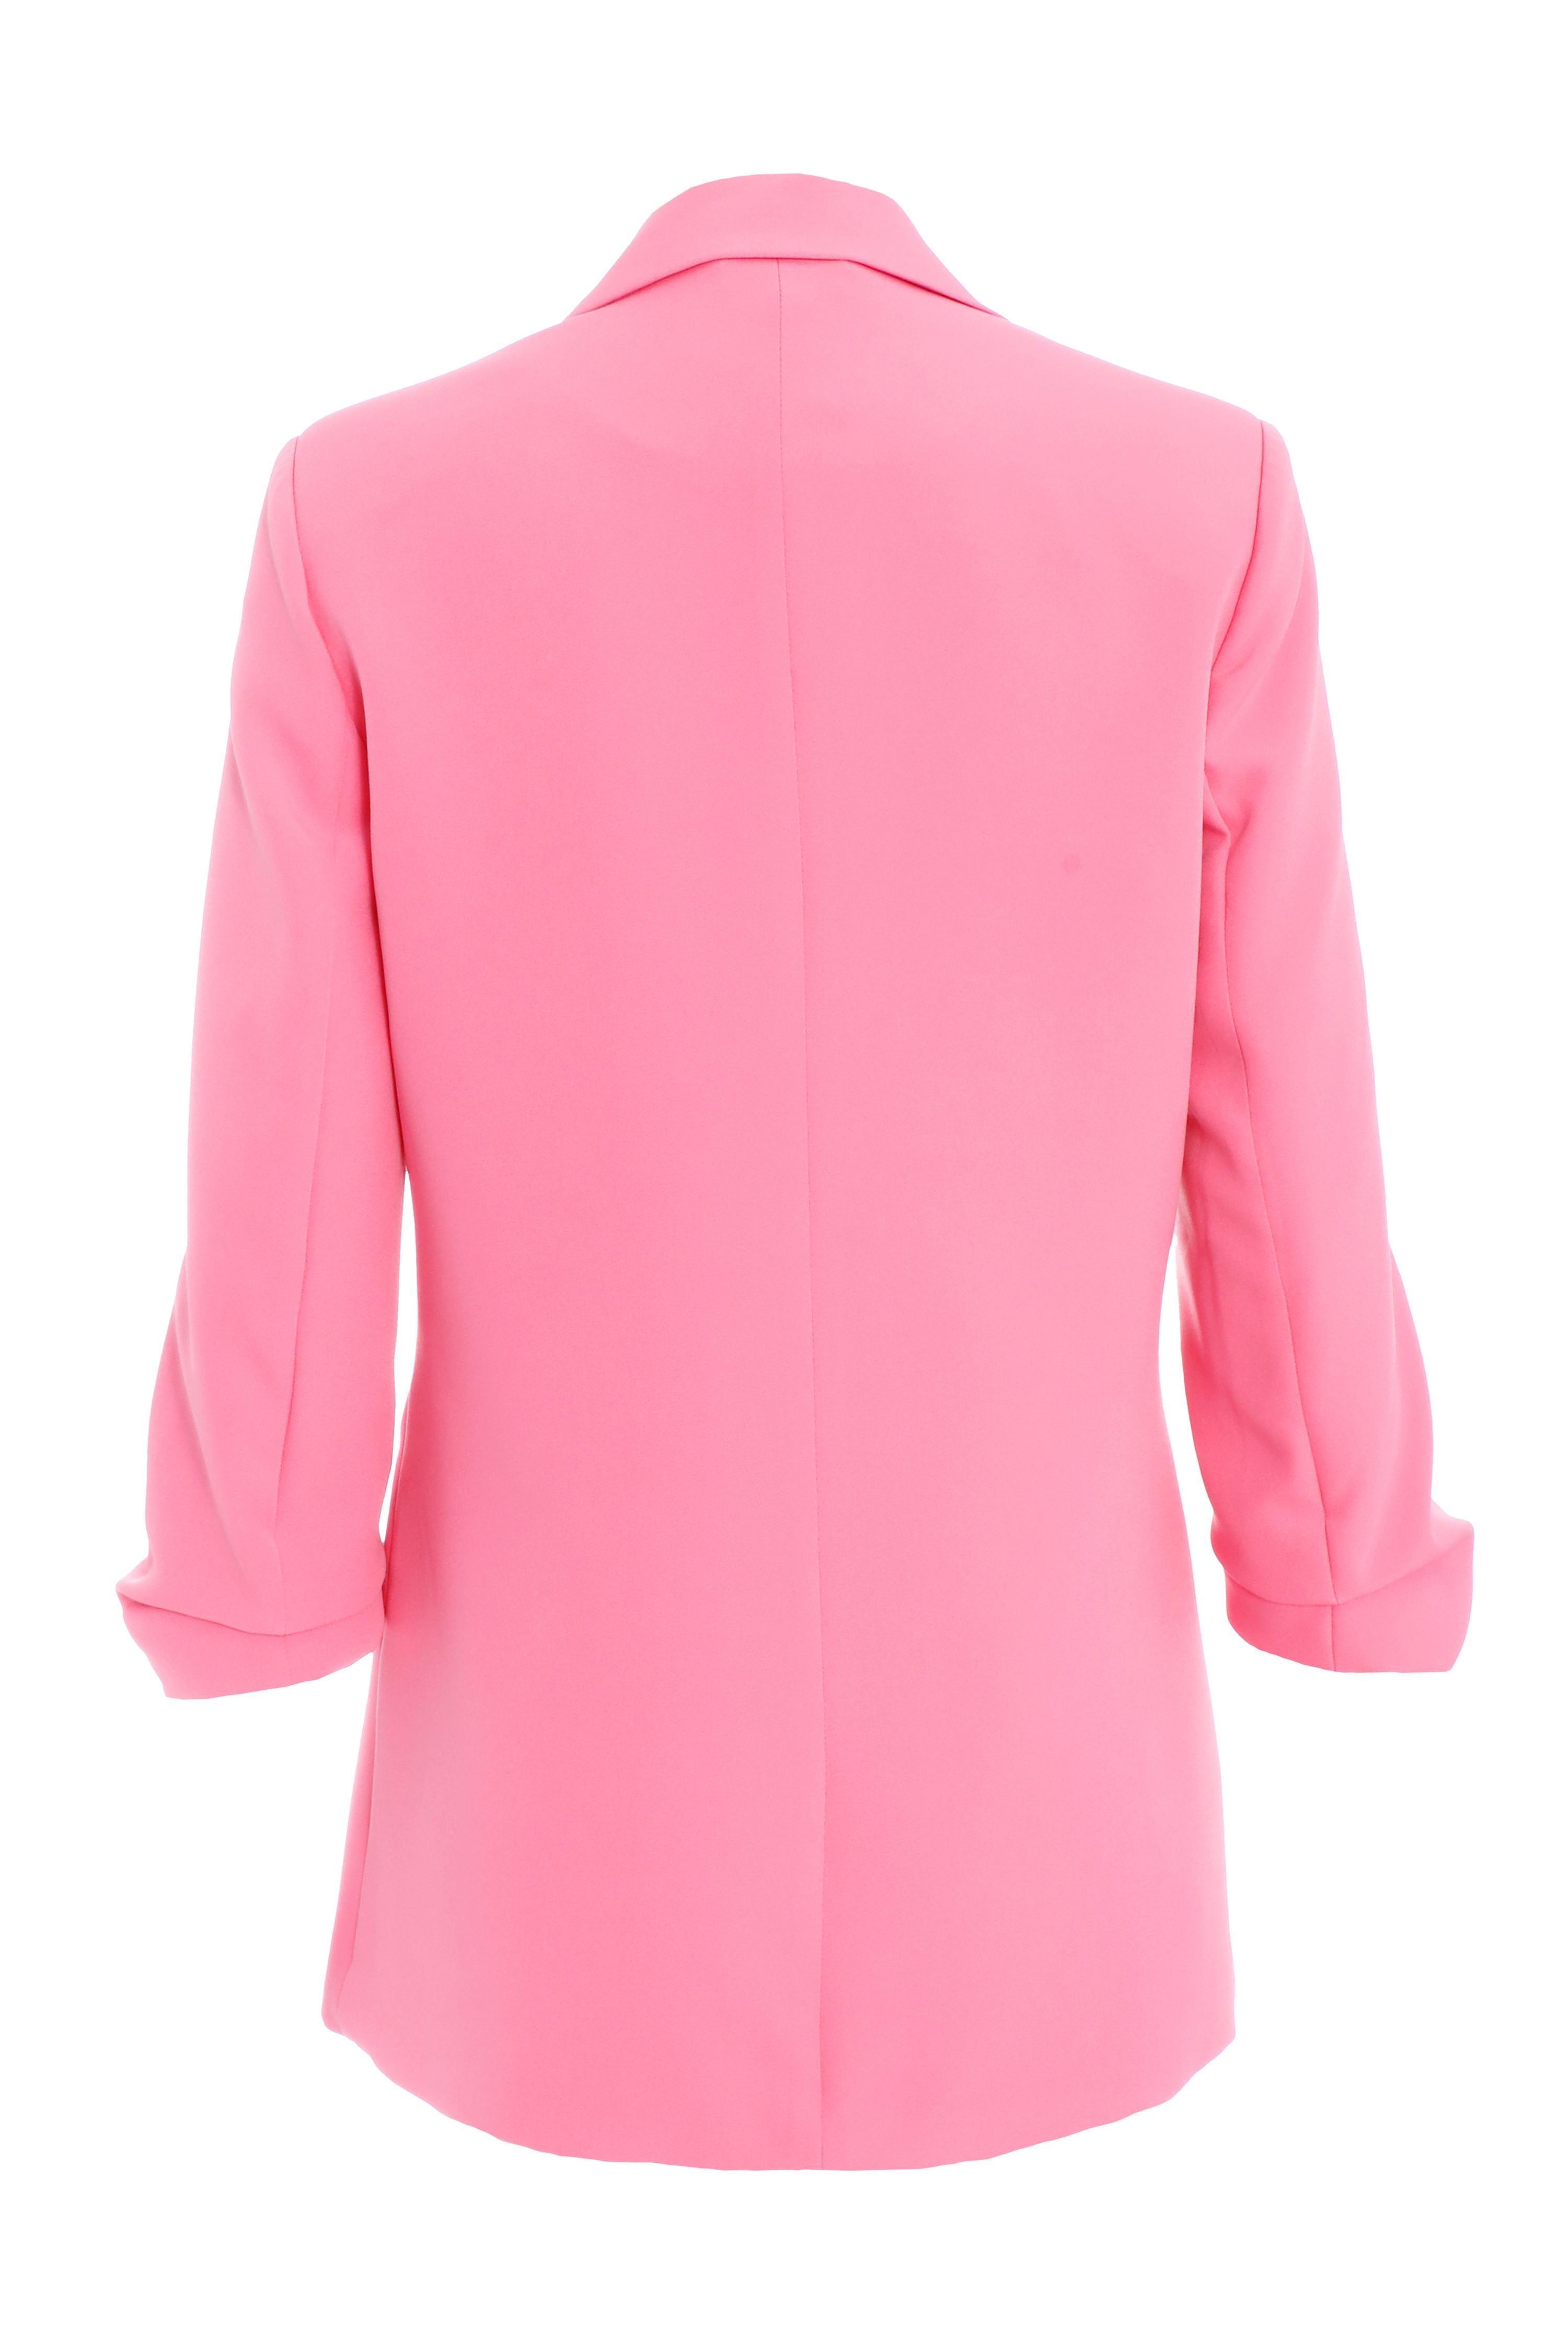 Back in Business Hot Pink Ruched Sleeve Blazer